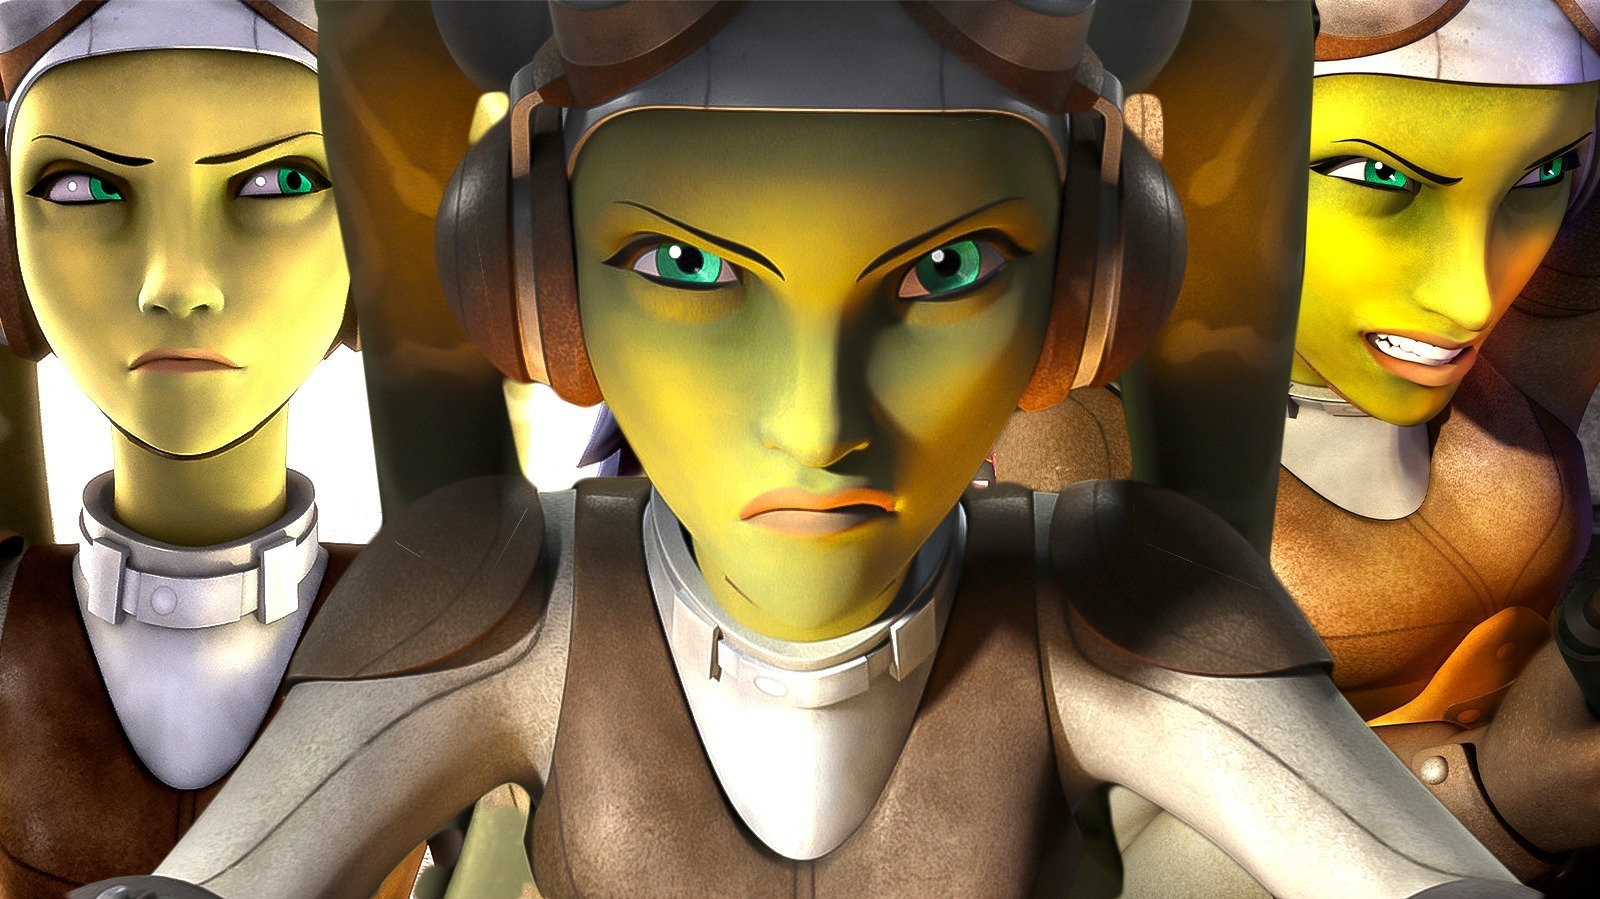 12 Hera Syndulla Facts To Prepare Star Wars Fans For The Ahsoka Series